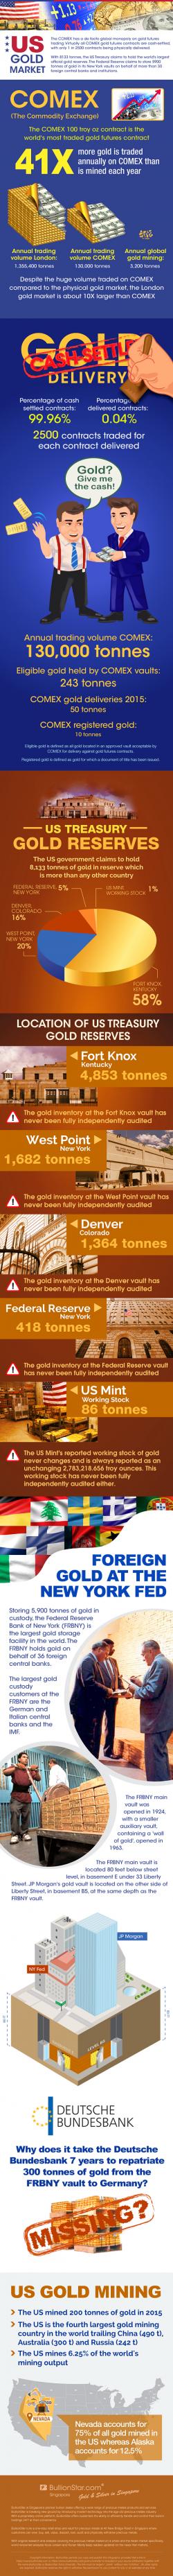 US Gold Market Infographic